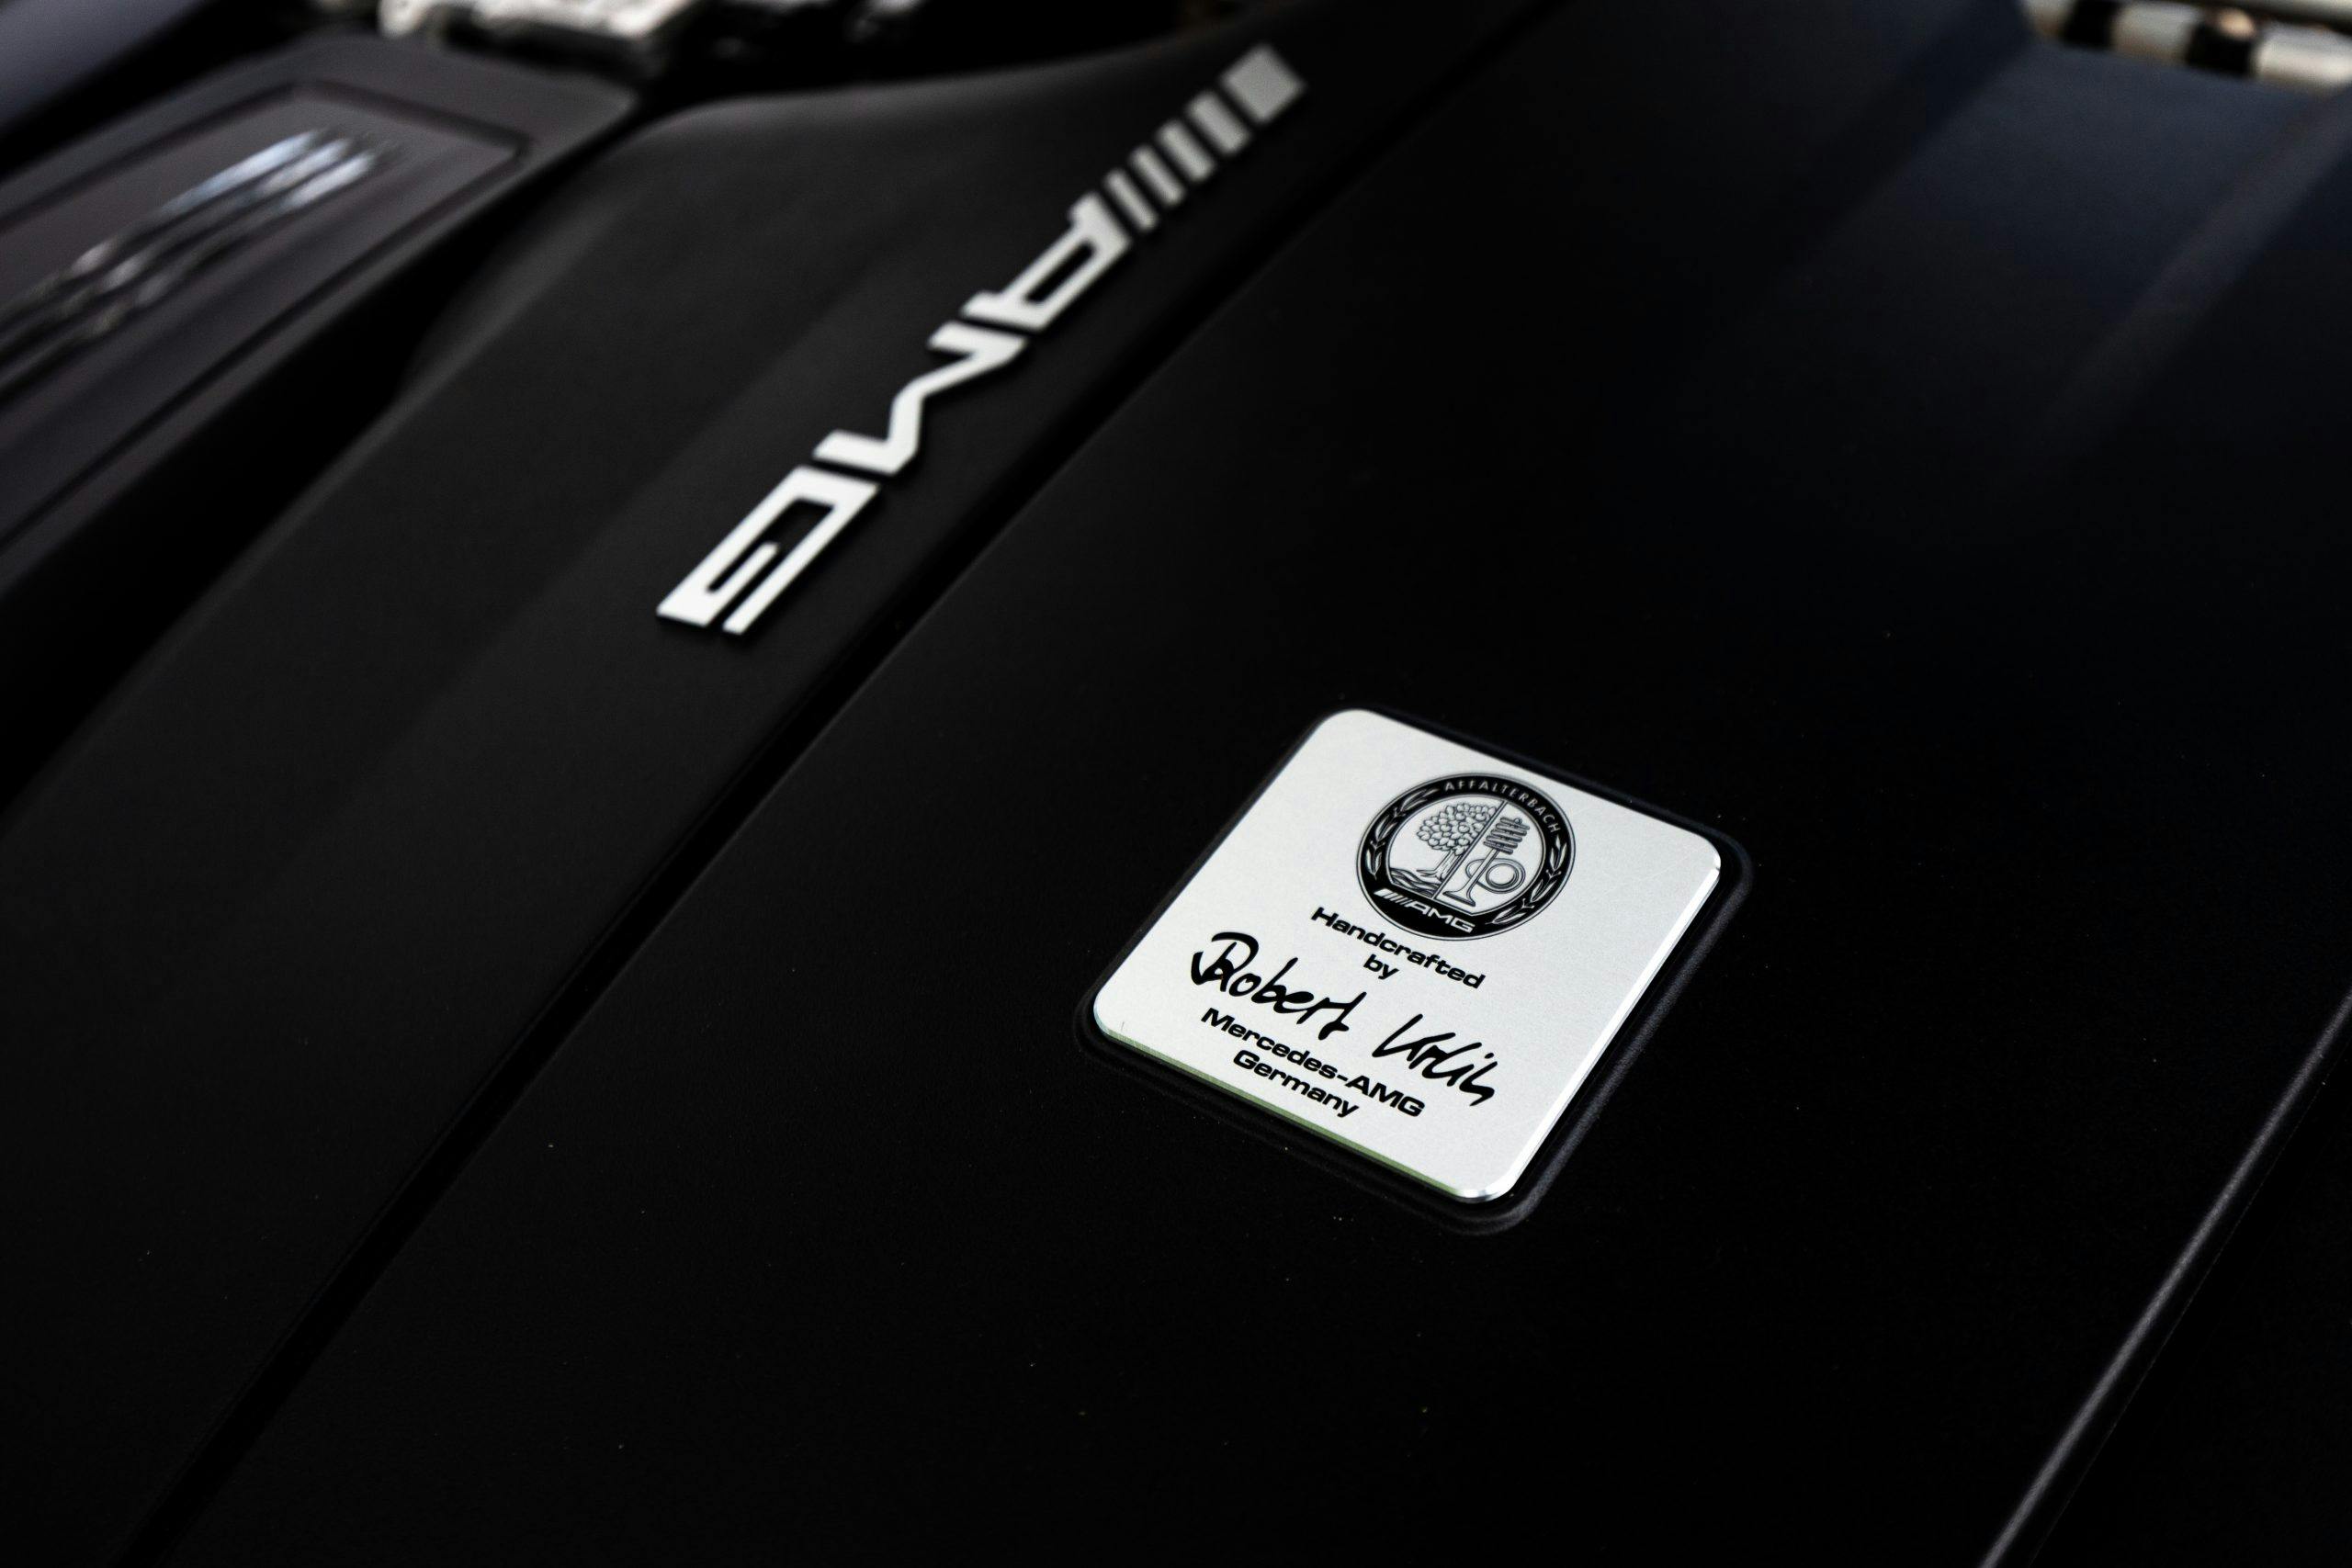 2021 Mercedes-AMG GT Stealth Edition engine cover inscription